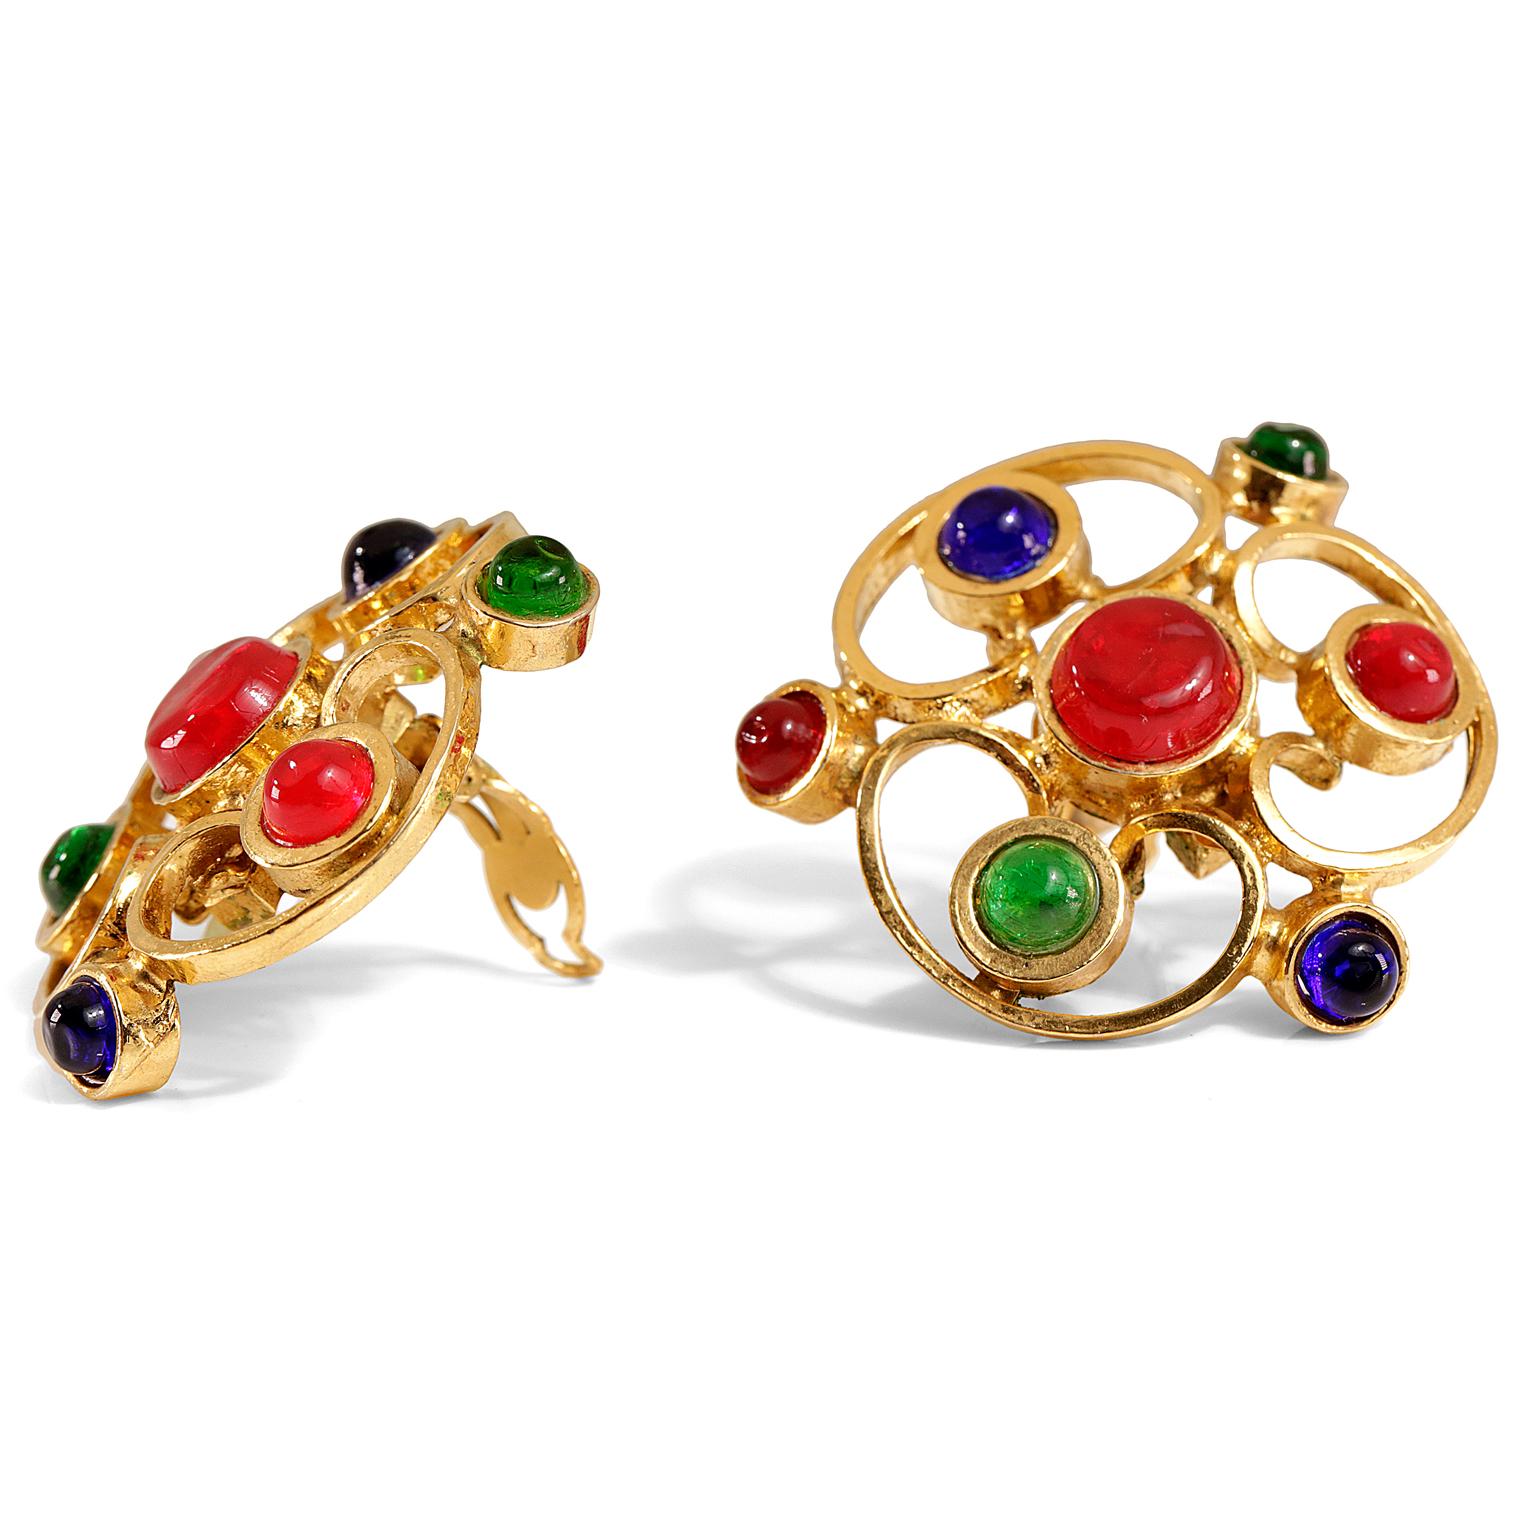 Chanel Gripoix Floral Spiral Clip On Earrings- mint condition
Red, green and blue Gripoix stones are arranged in a gold spiral cutout flower large earring.  Clip on closure.  
